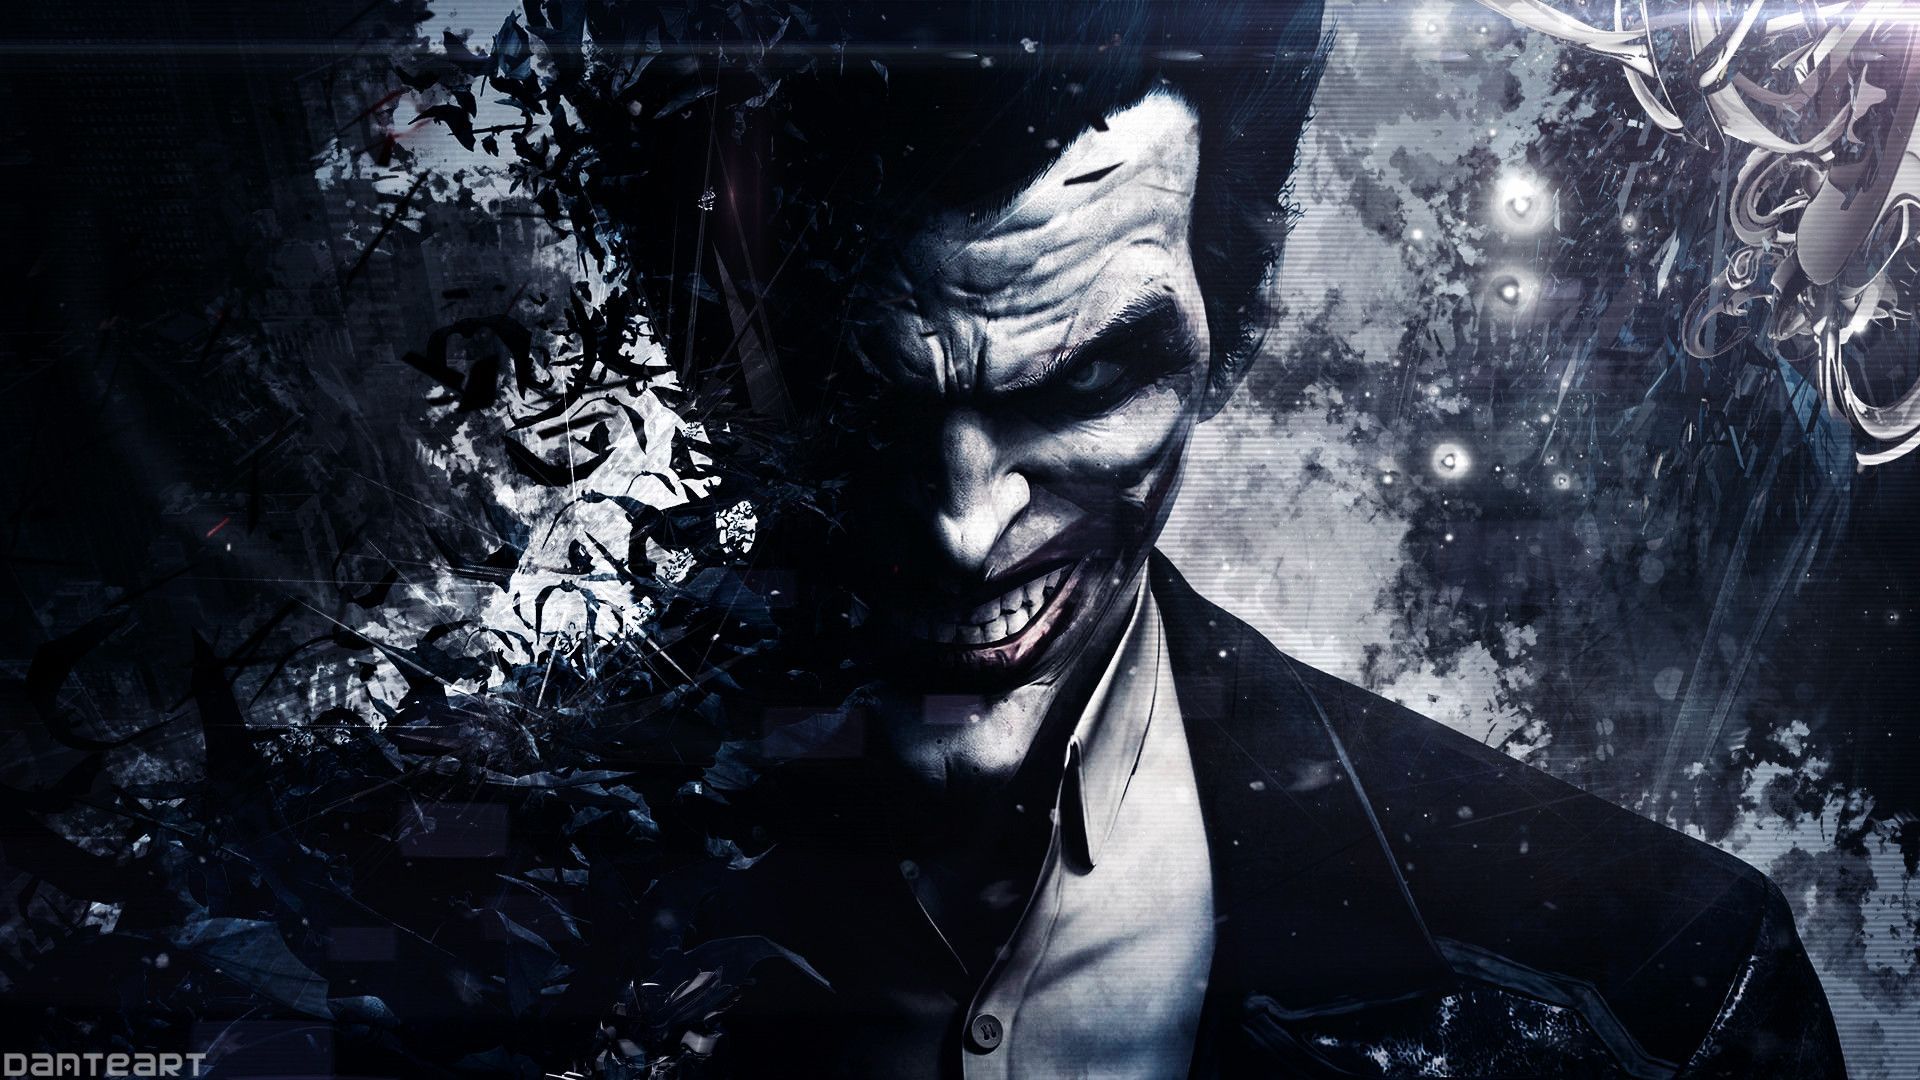 for iphone download Joker free